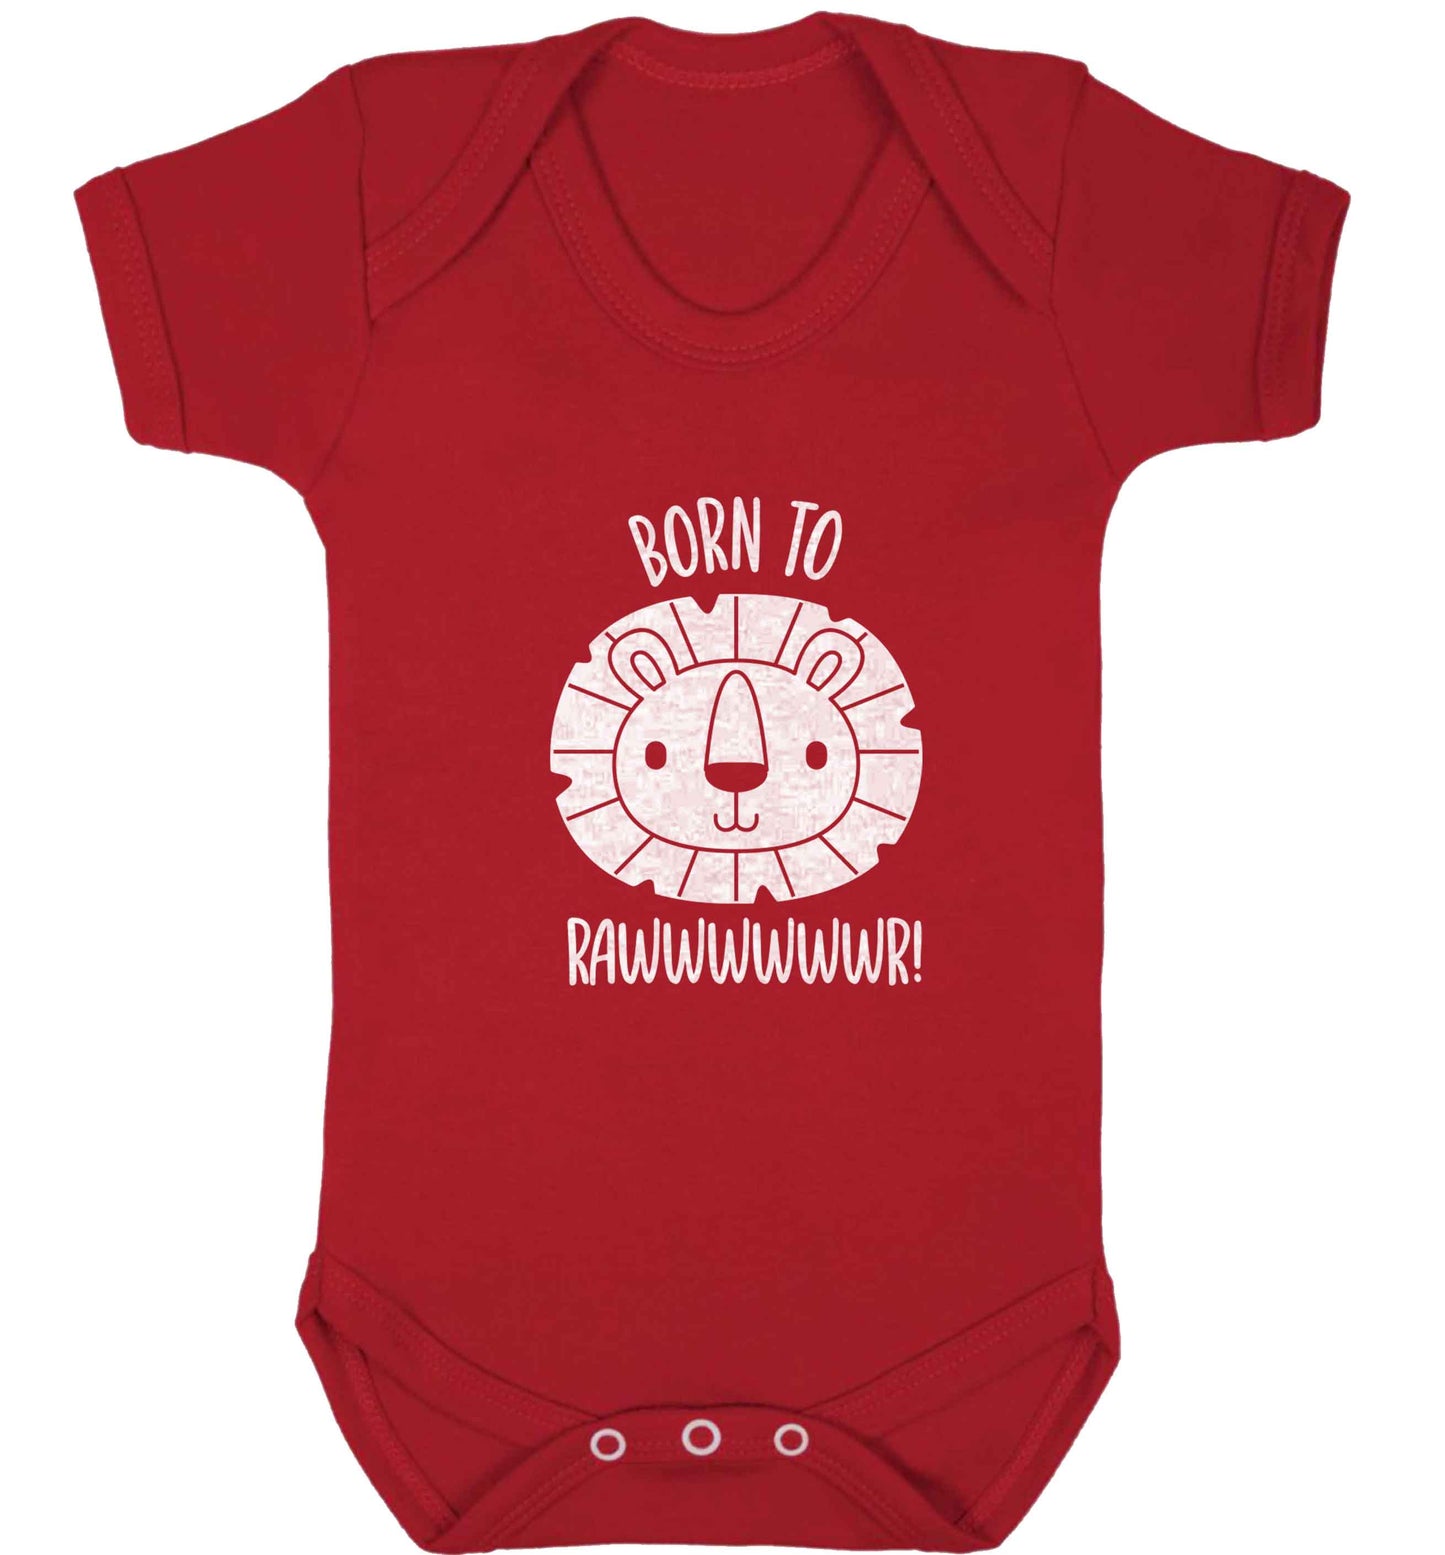 Born to rawr baby vest red 18-24 months